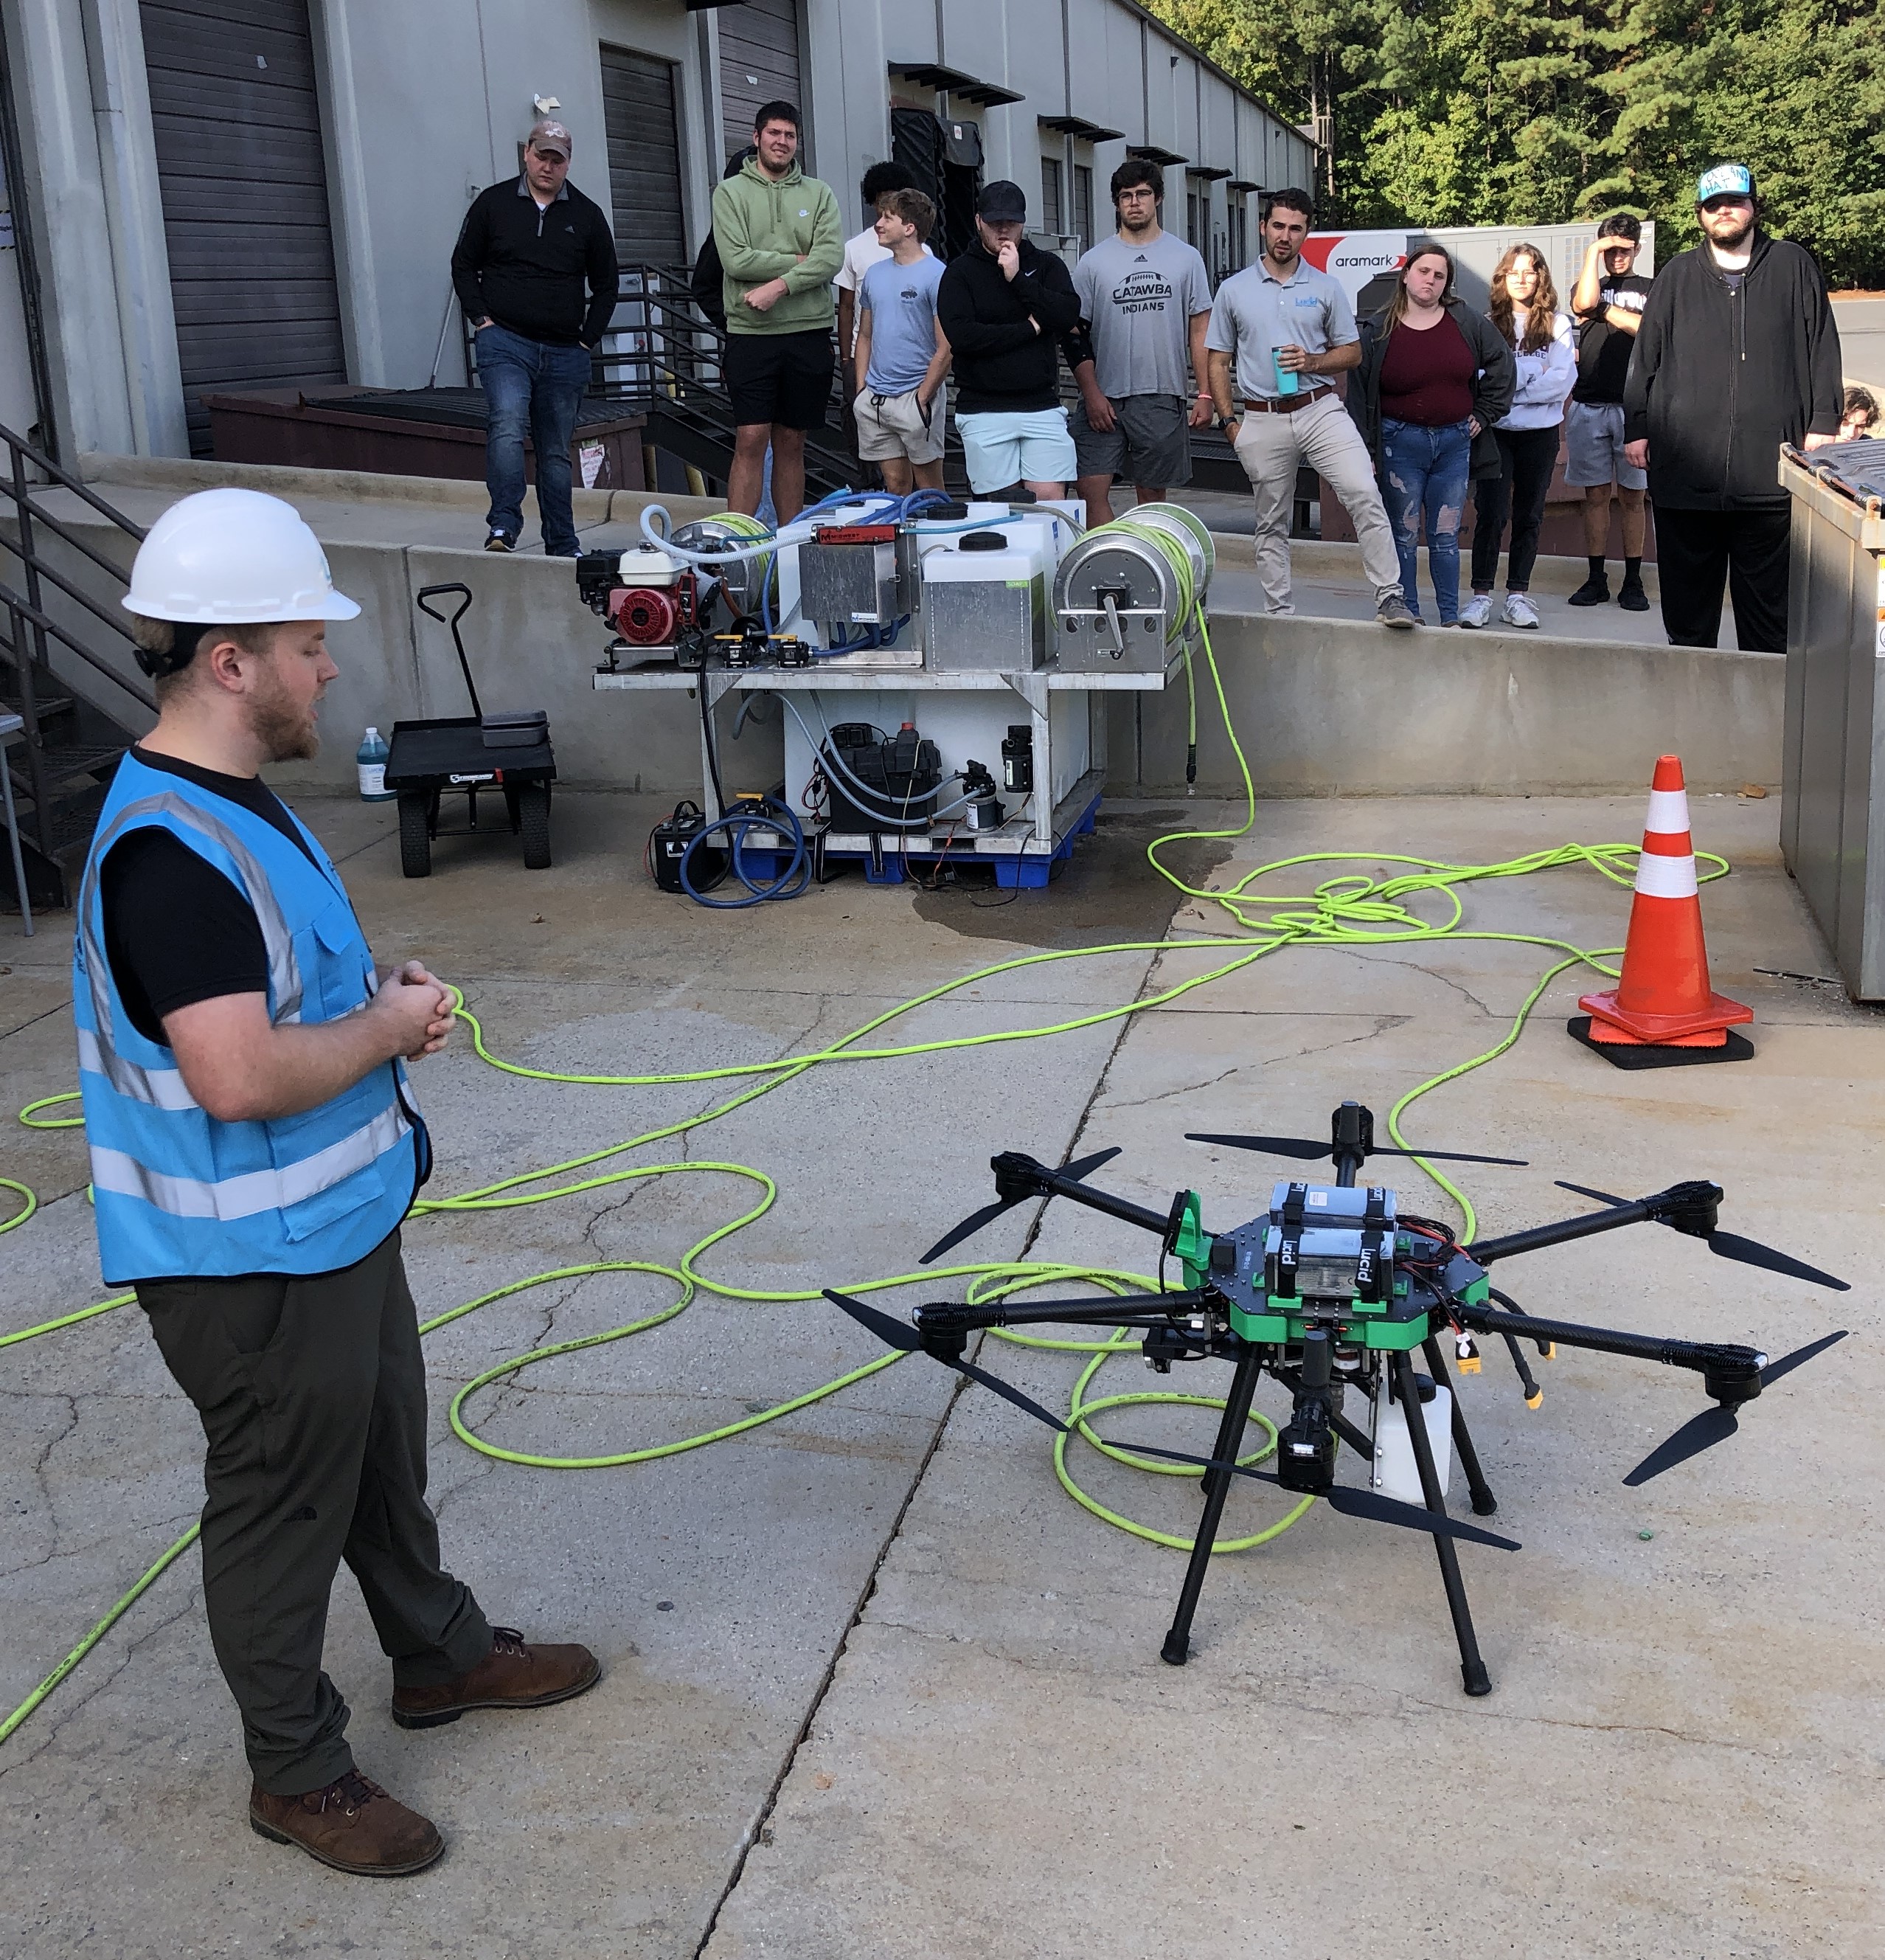 Andrew Ashur demonstrates his cleaning drone to a group of Catawba students